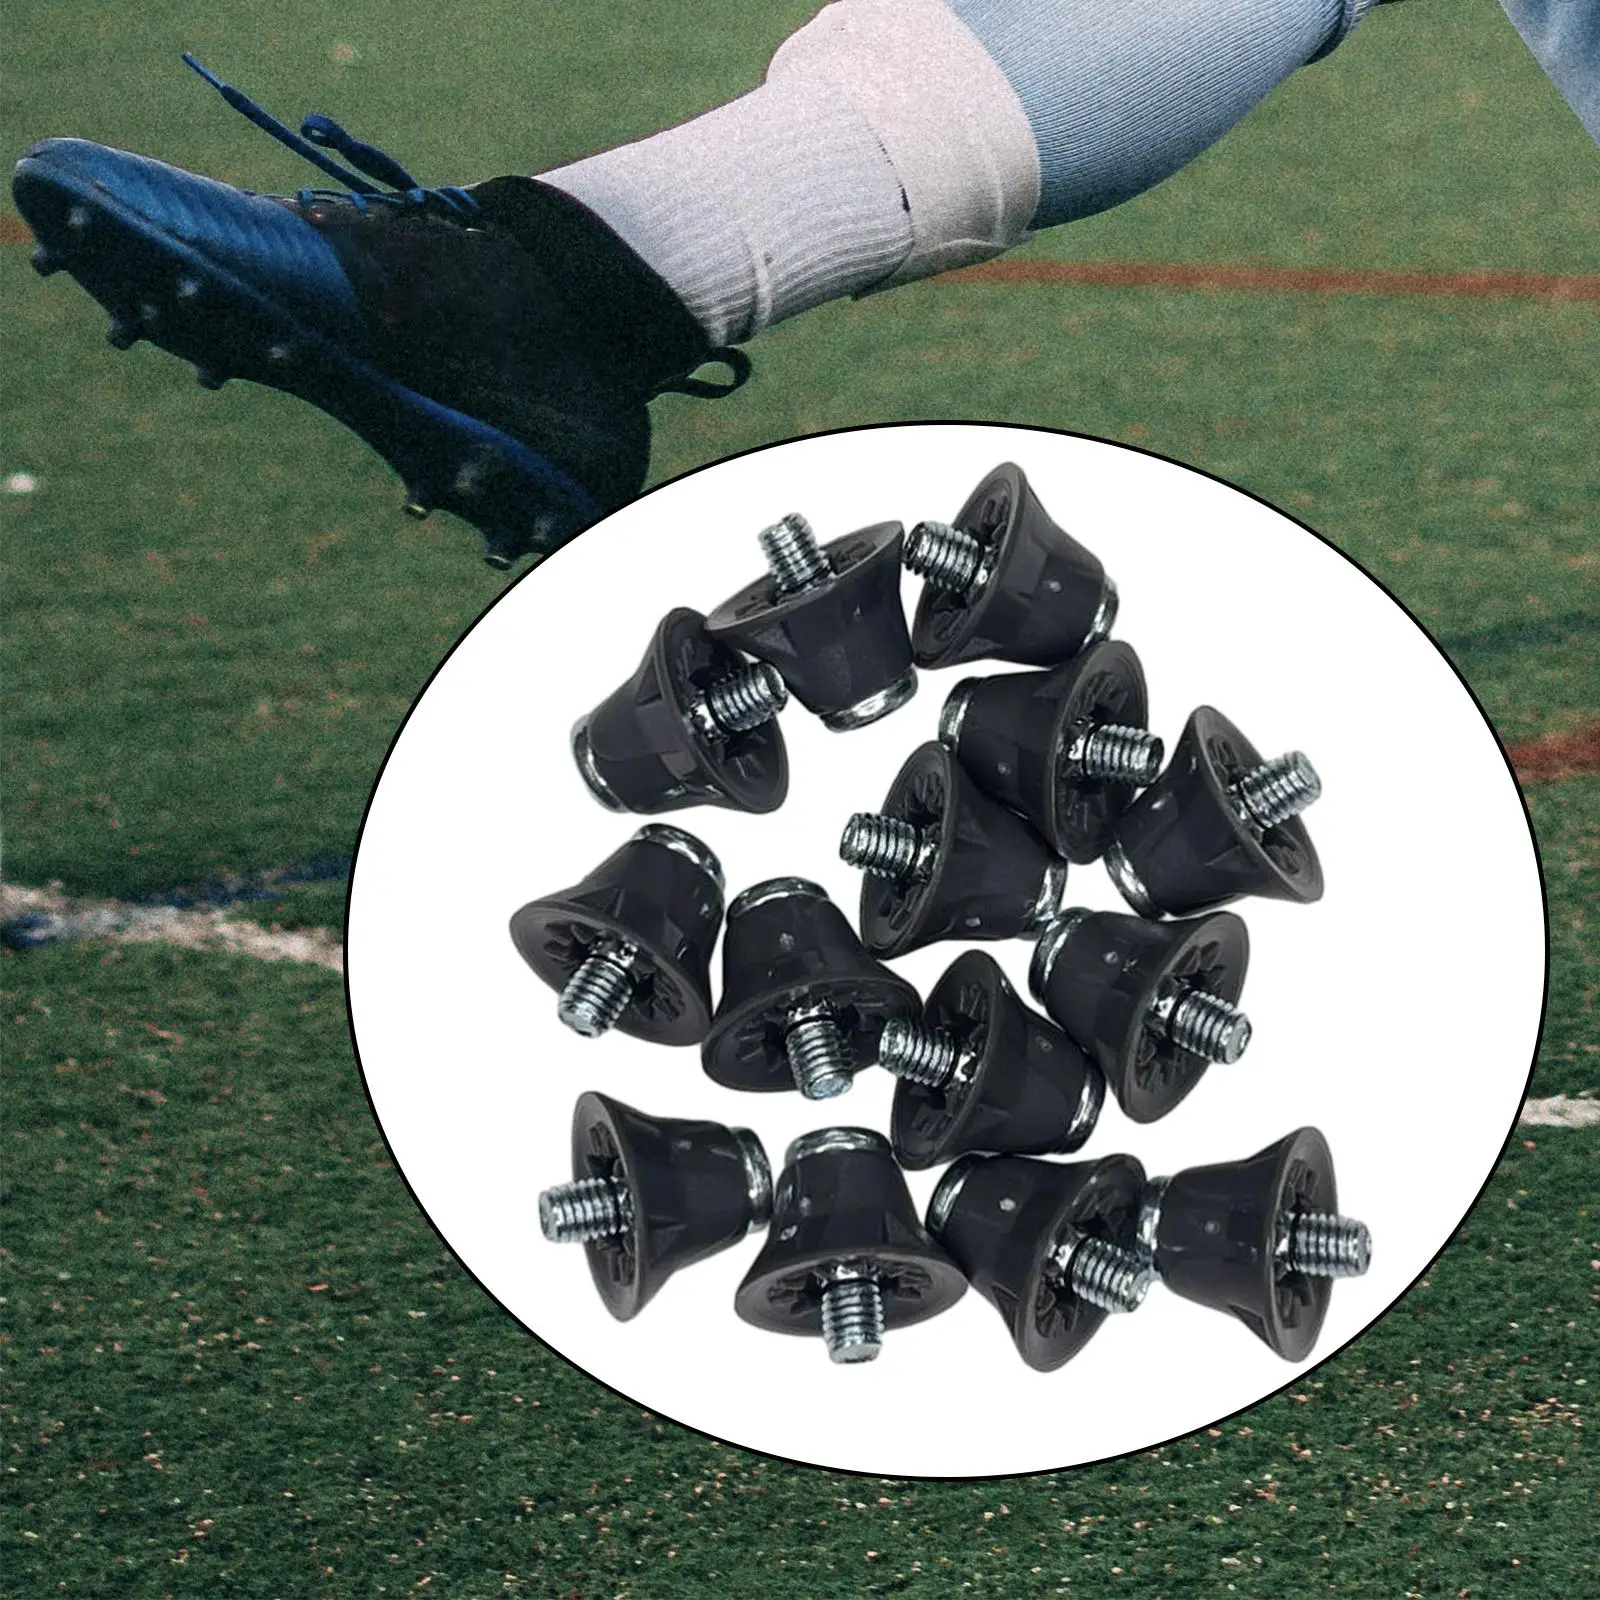 14 Pieces Track Shoes Accessories Soccer Shoe Spikes M5 Turf Firm Ground Replacement Spikes for Athletic Sneakers